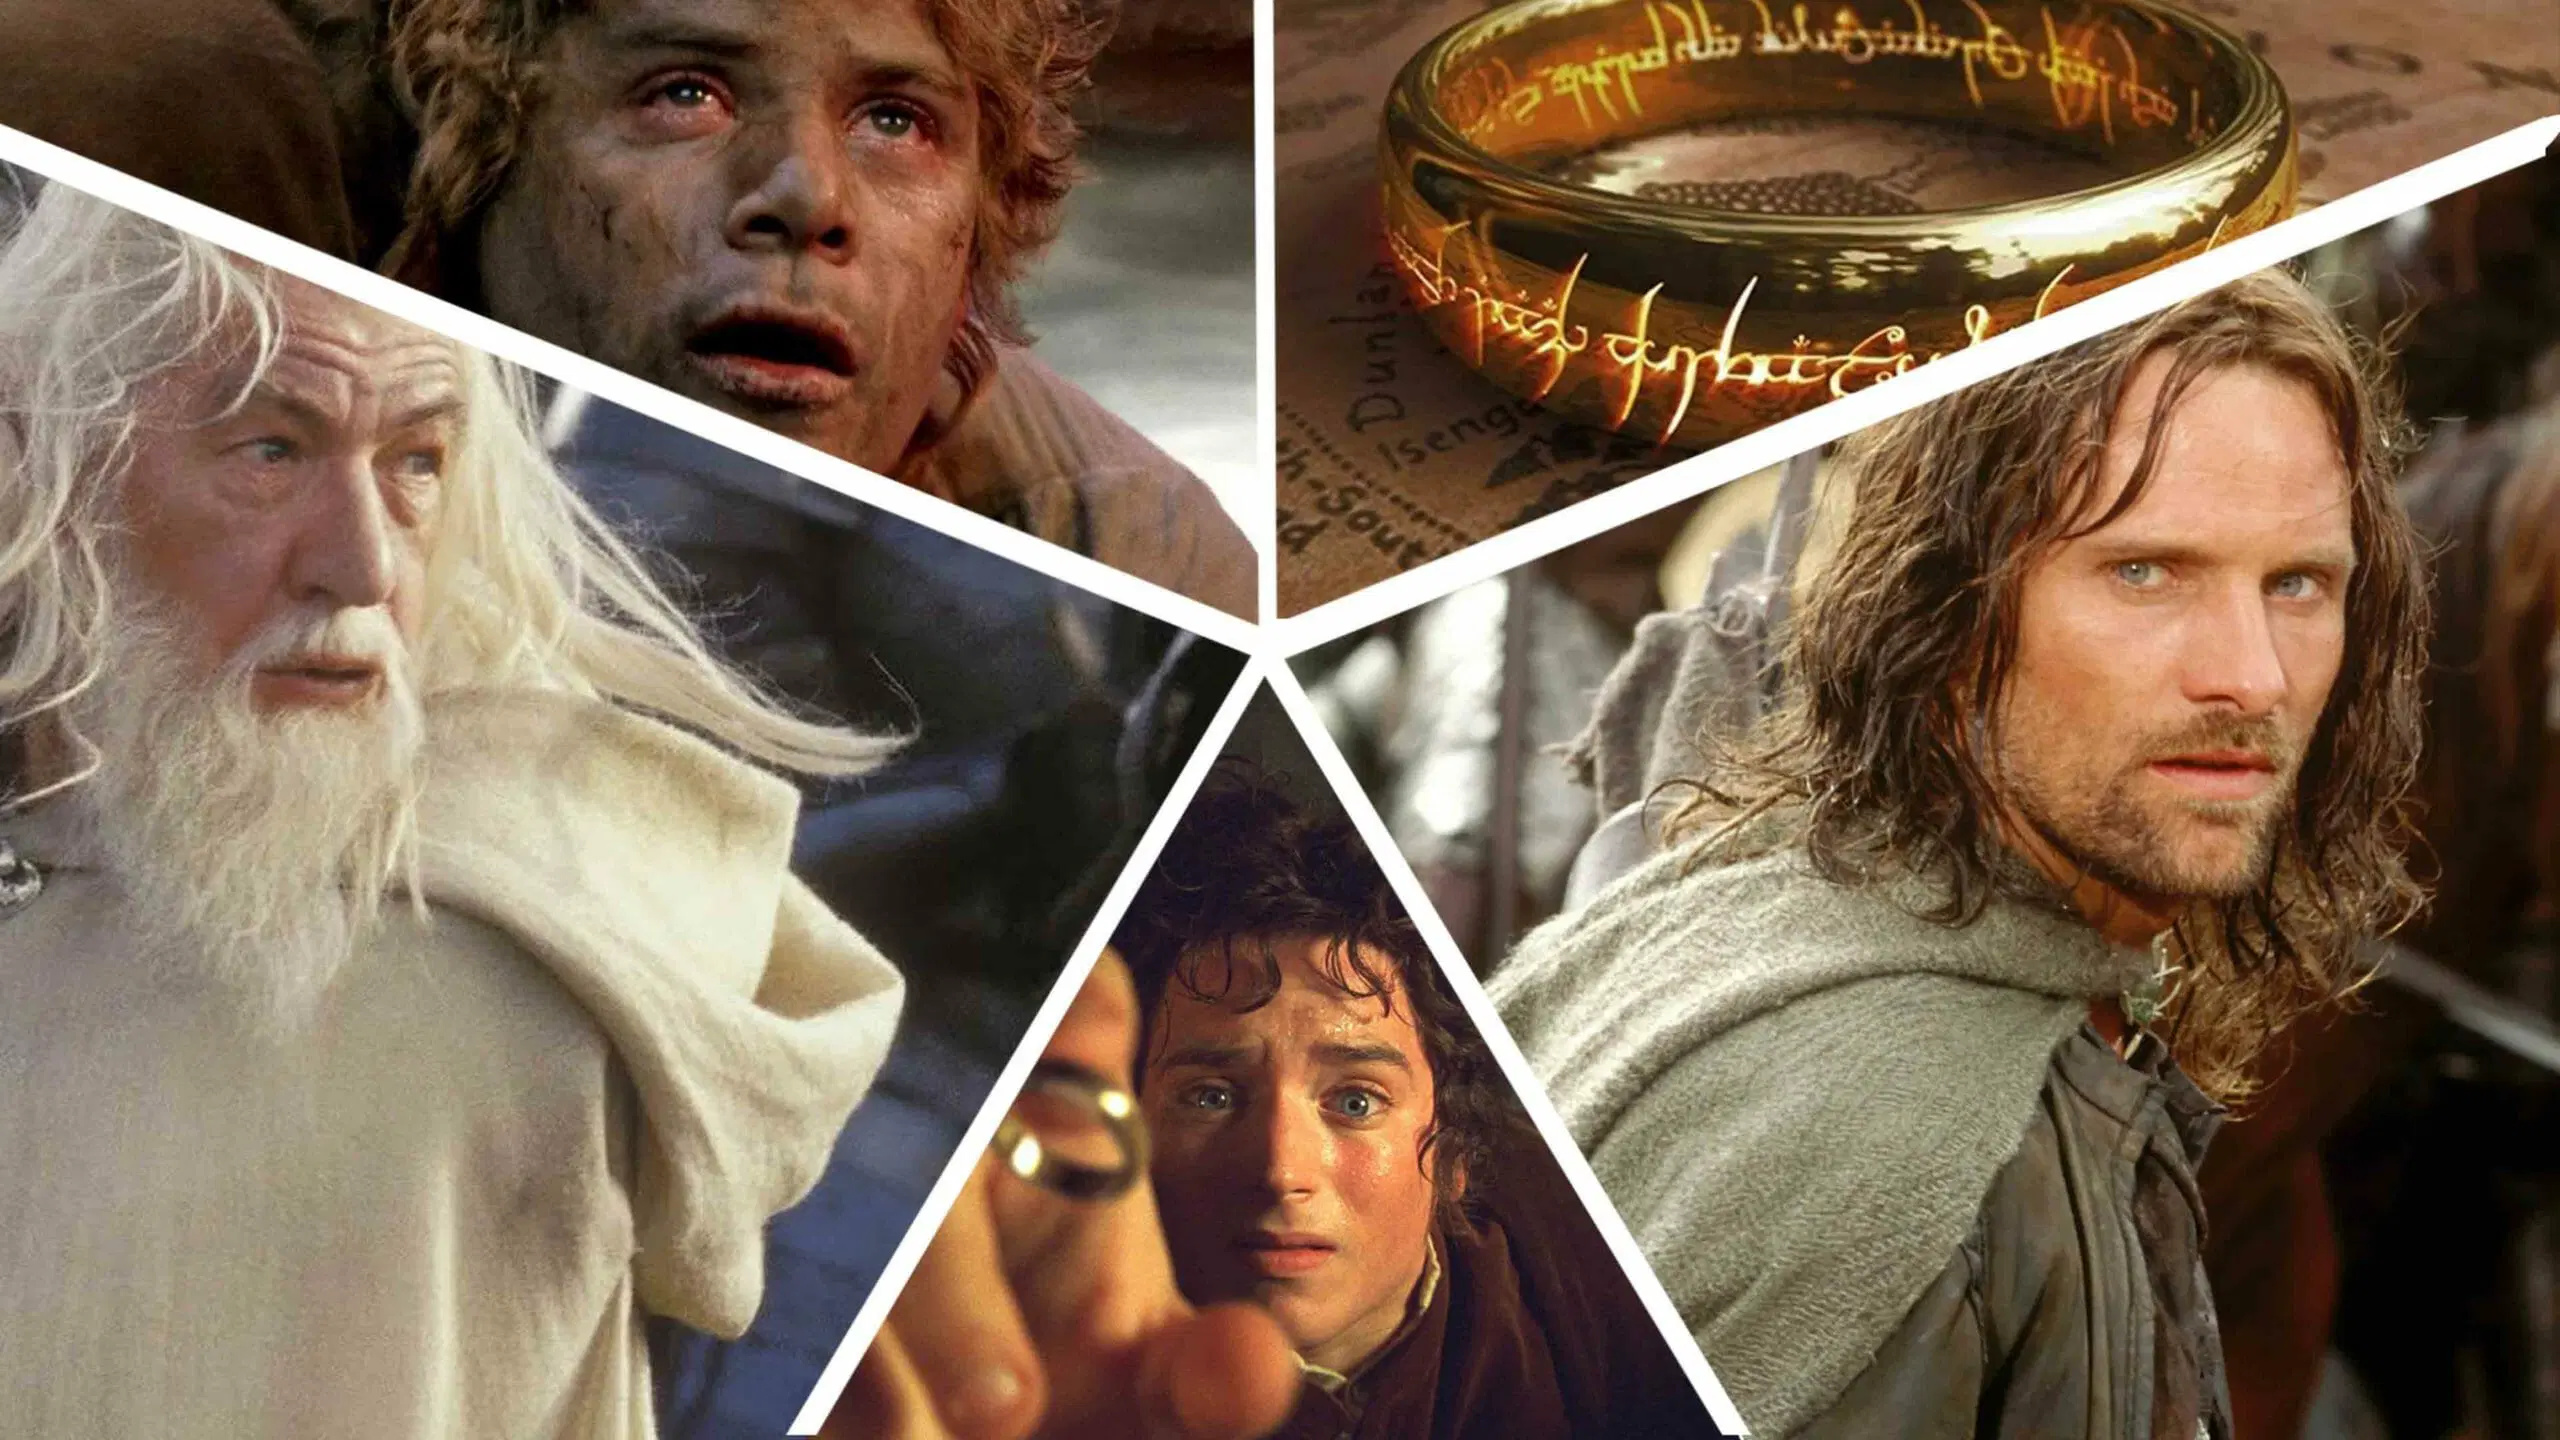 Sam, Fascinating facts, Lord of the Rings trivia, Fun knowledge, 2560x1440 HD Desktop